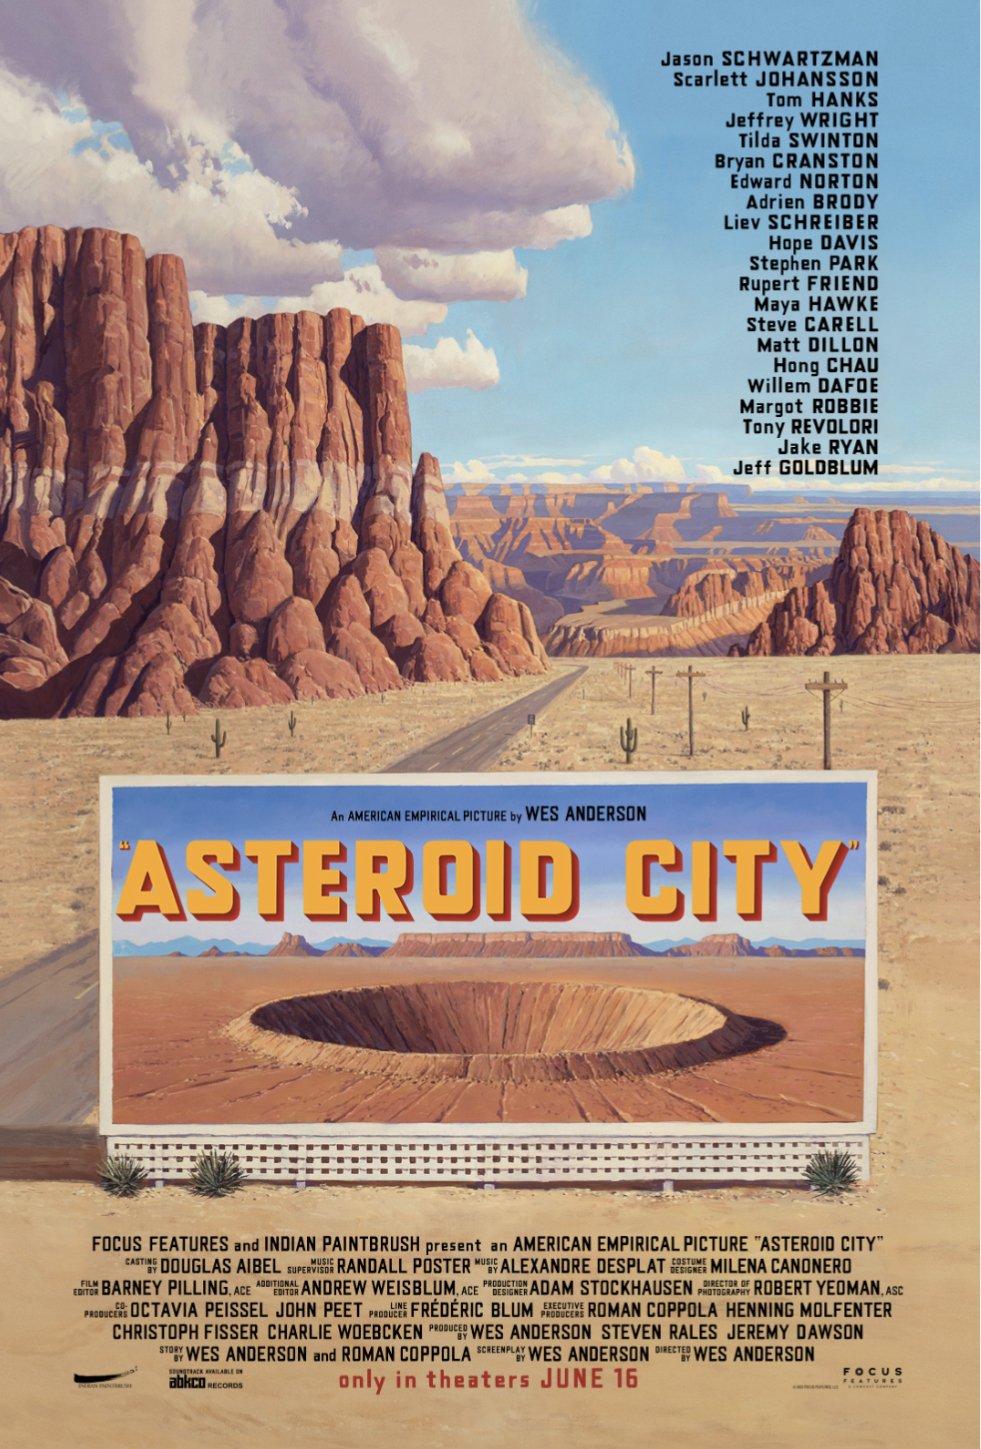 A stylized drawing of desert road winds it was through rock formations. The movie title Asteroid CIty is centre with a image of a crater below it.